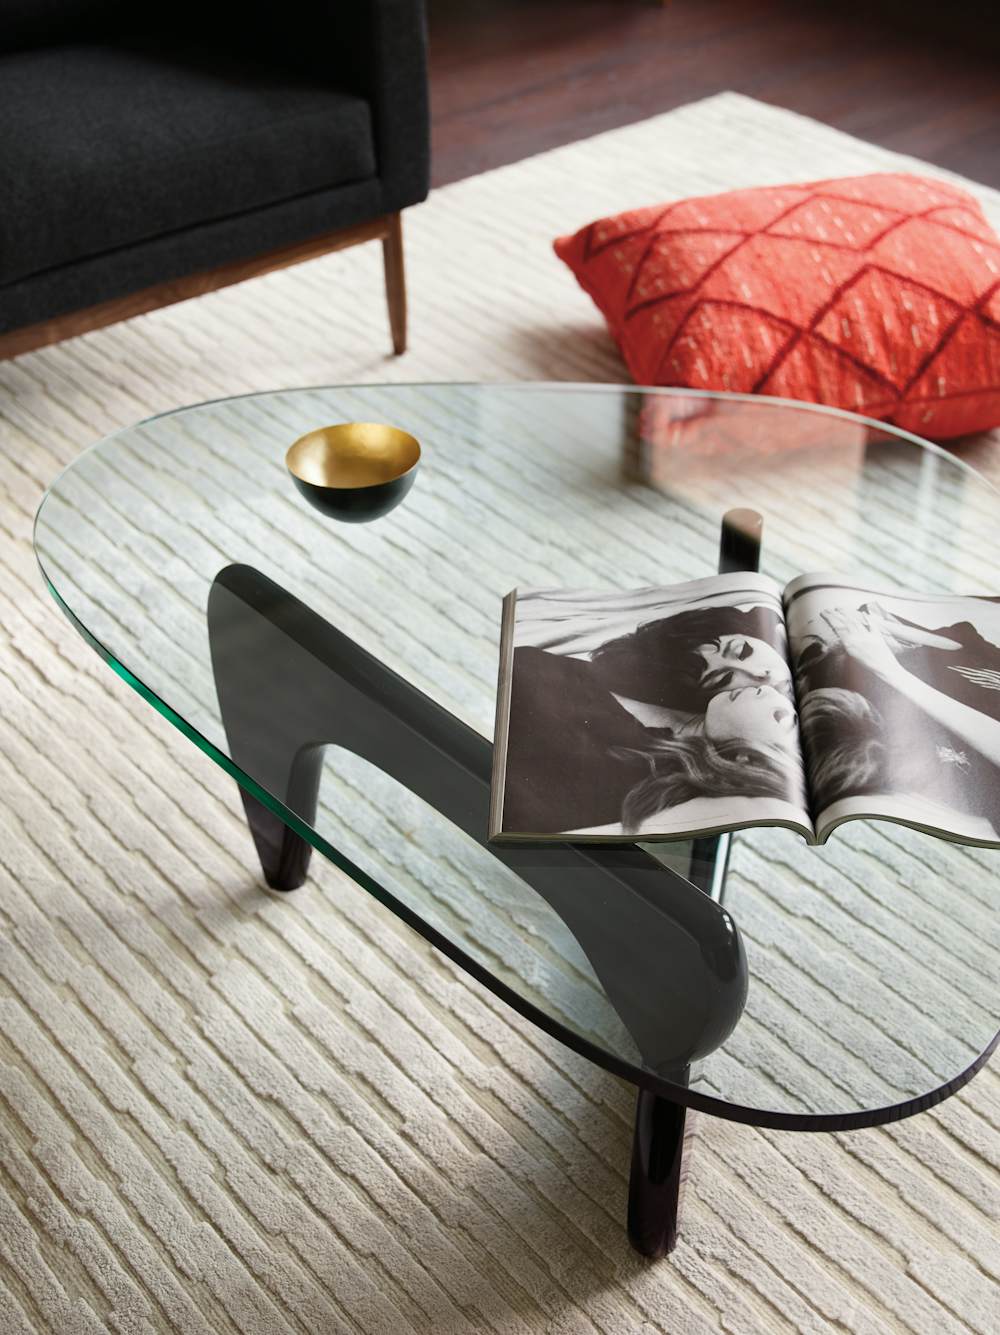 Noguchi Table in a living room setting